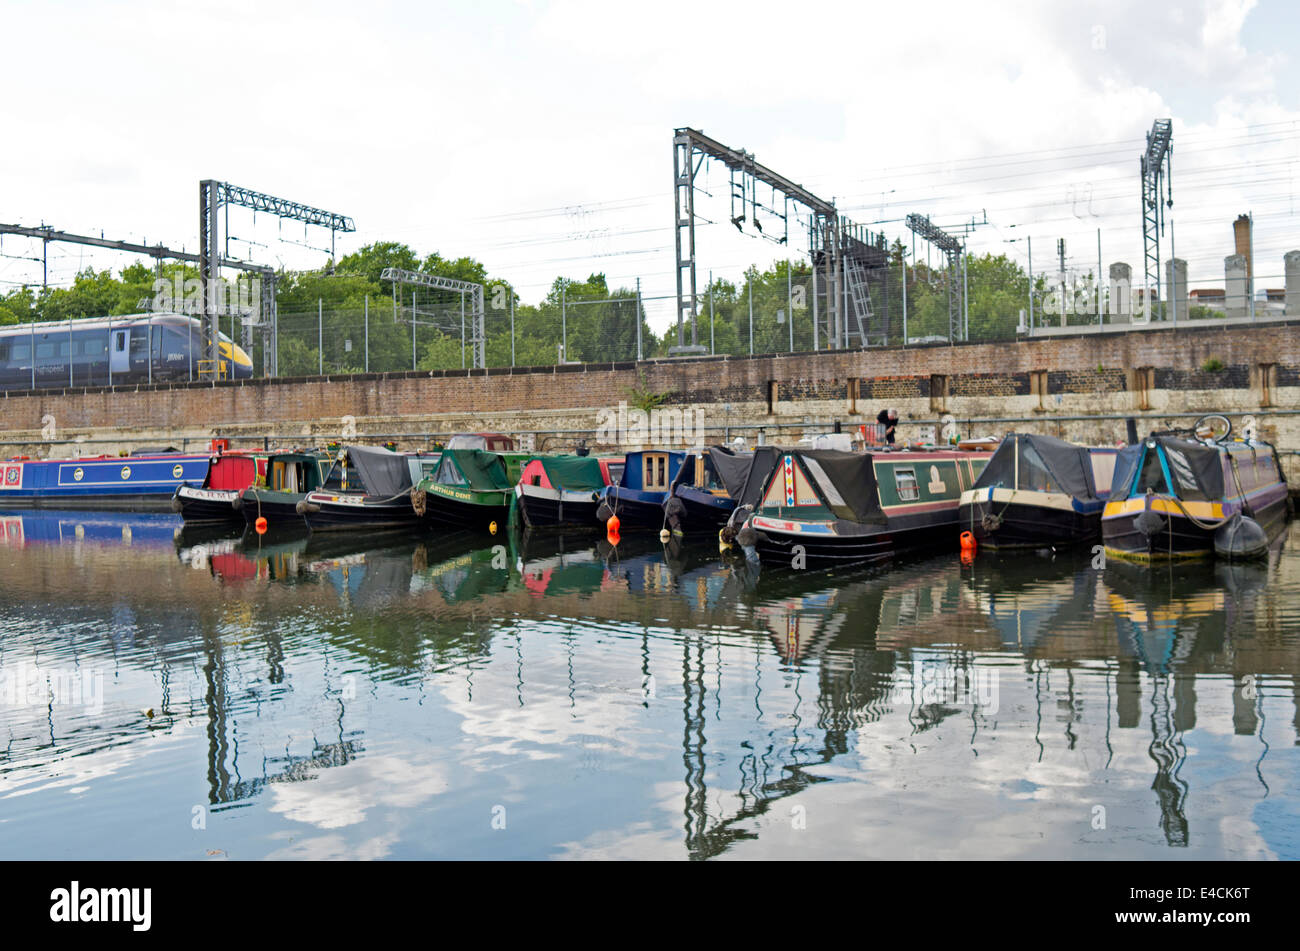 A Eurostar train passes above canal boats moored in the Regent's Canal in King's Cross, London. Stock Photo